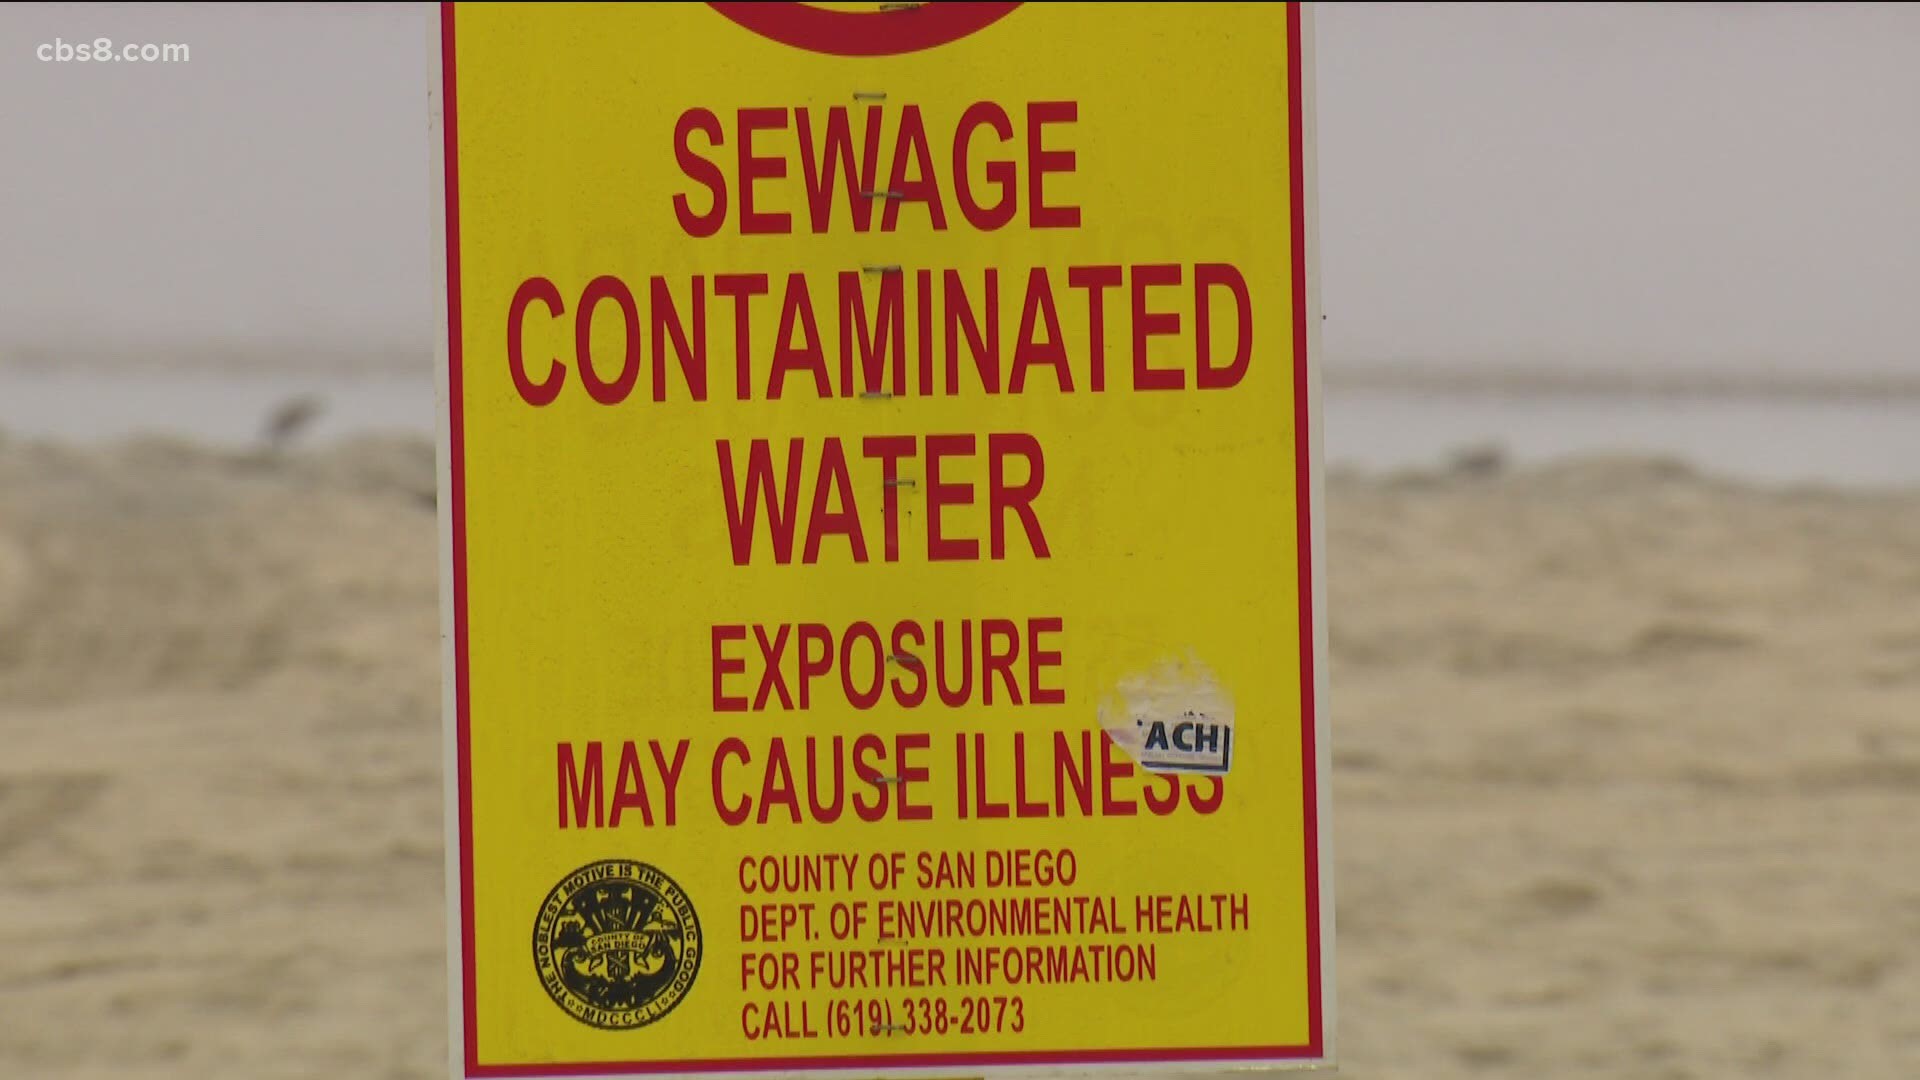 It is estimated that 60 million gallons of sewage have flown through the river every day for the last 6 months.